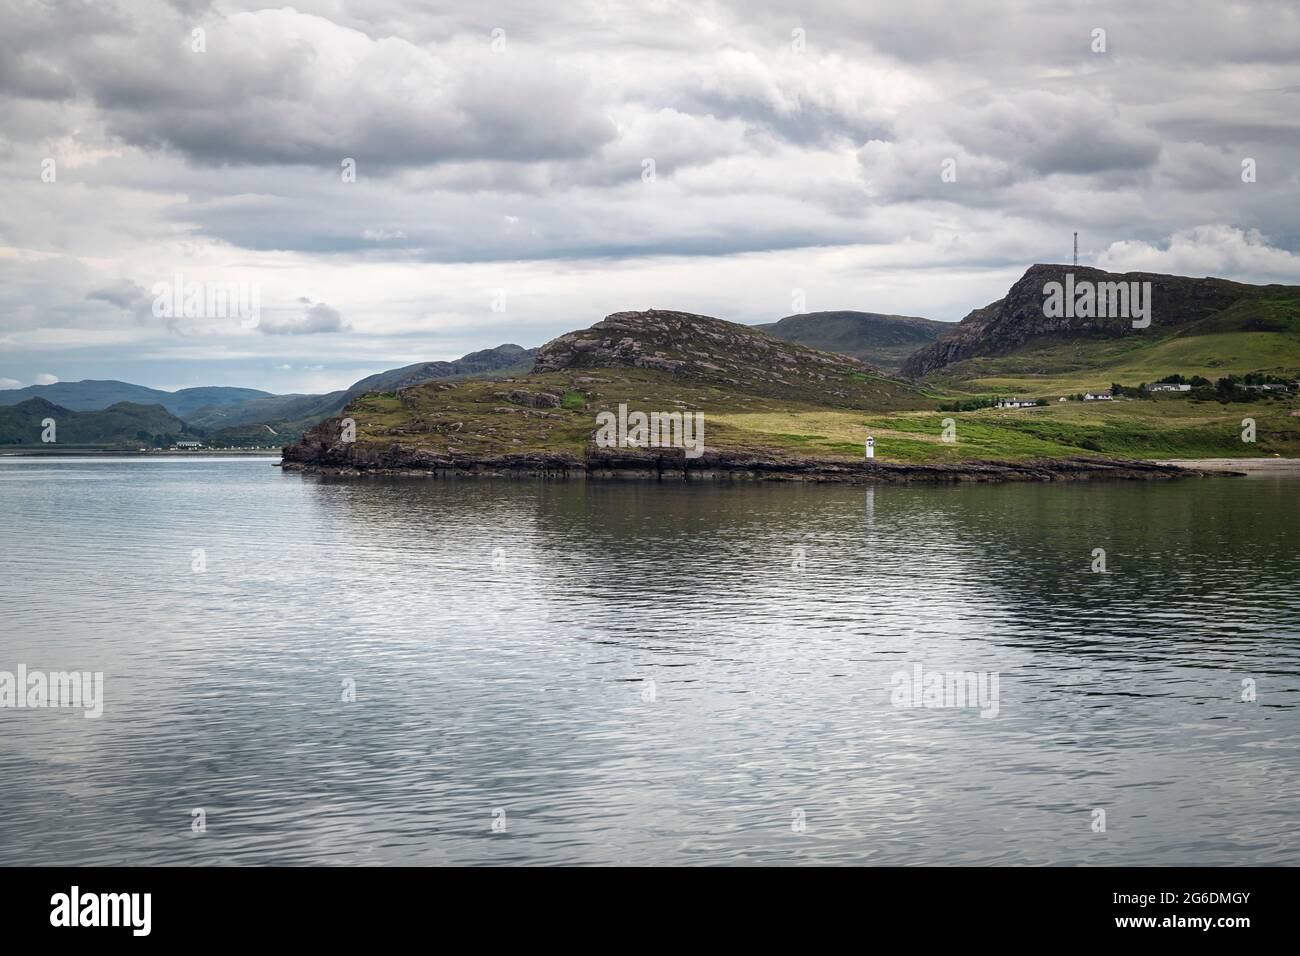 A 3 shot HDR image of Rudhacadail, the Point of the Sleepy People, and it's lighthouse leaving Ullapool bound for Stornoway, Scotland. 19 June 2021 Stock Photo